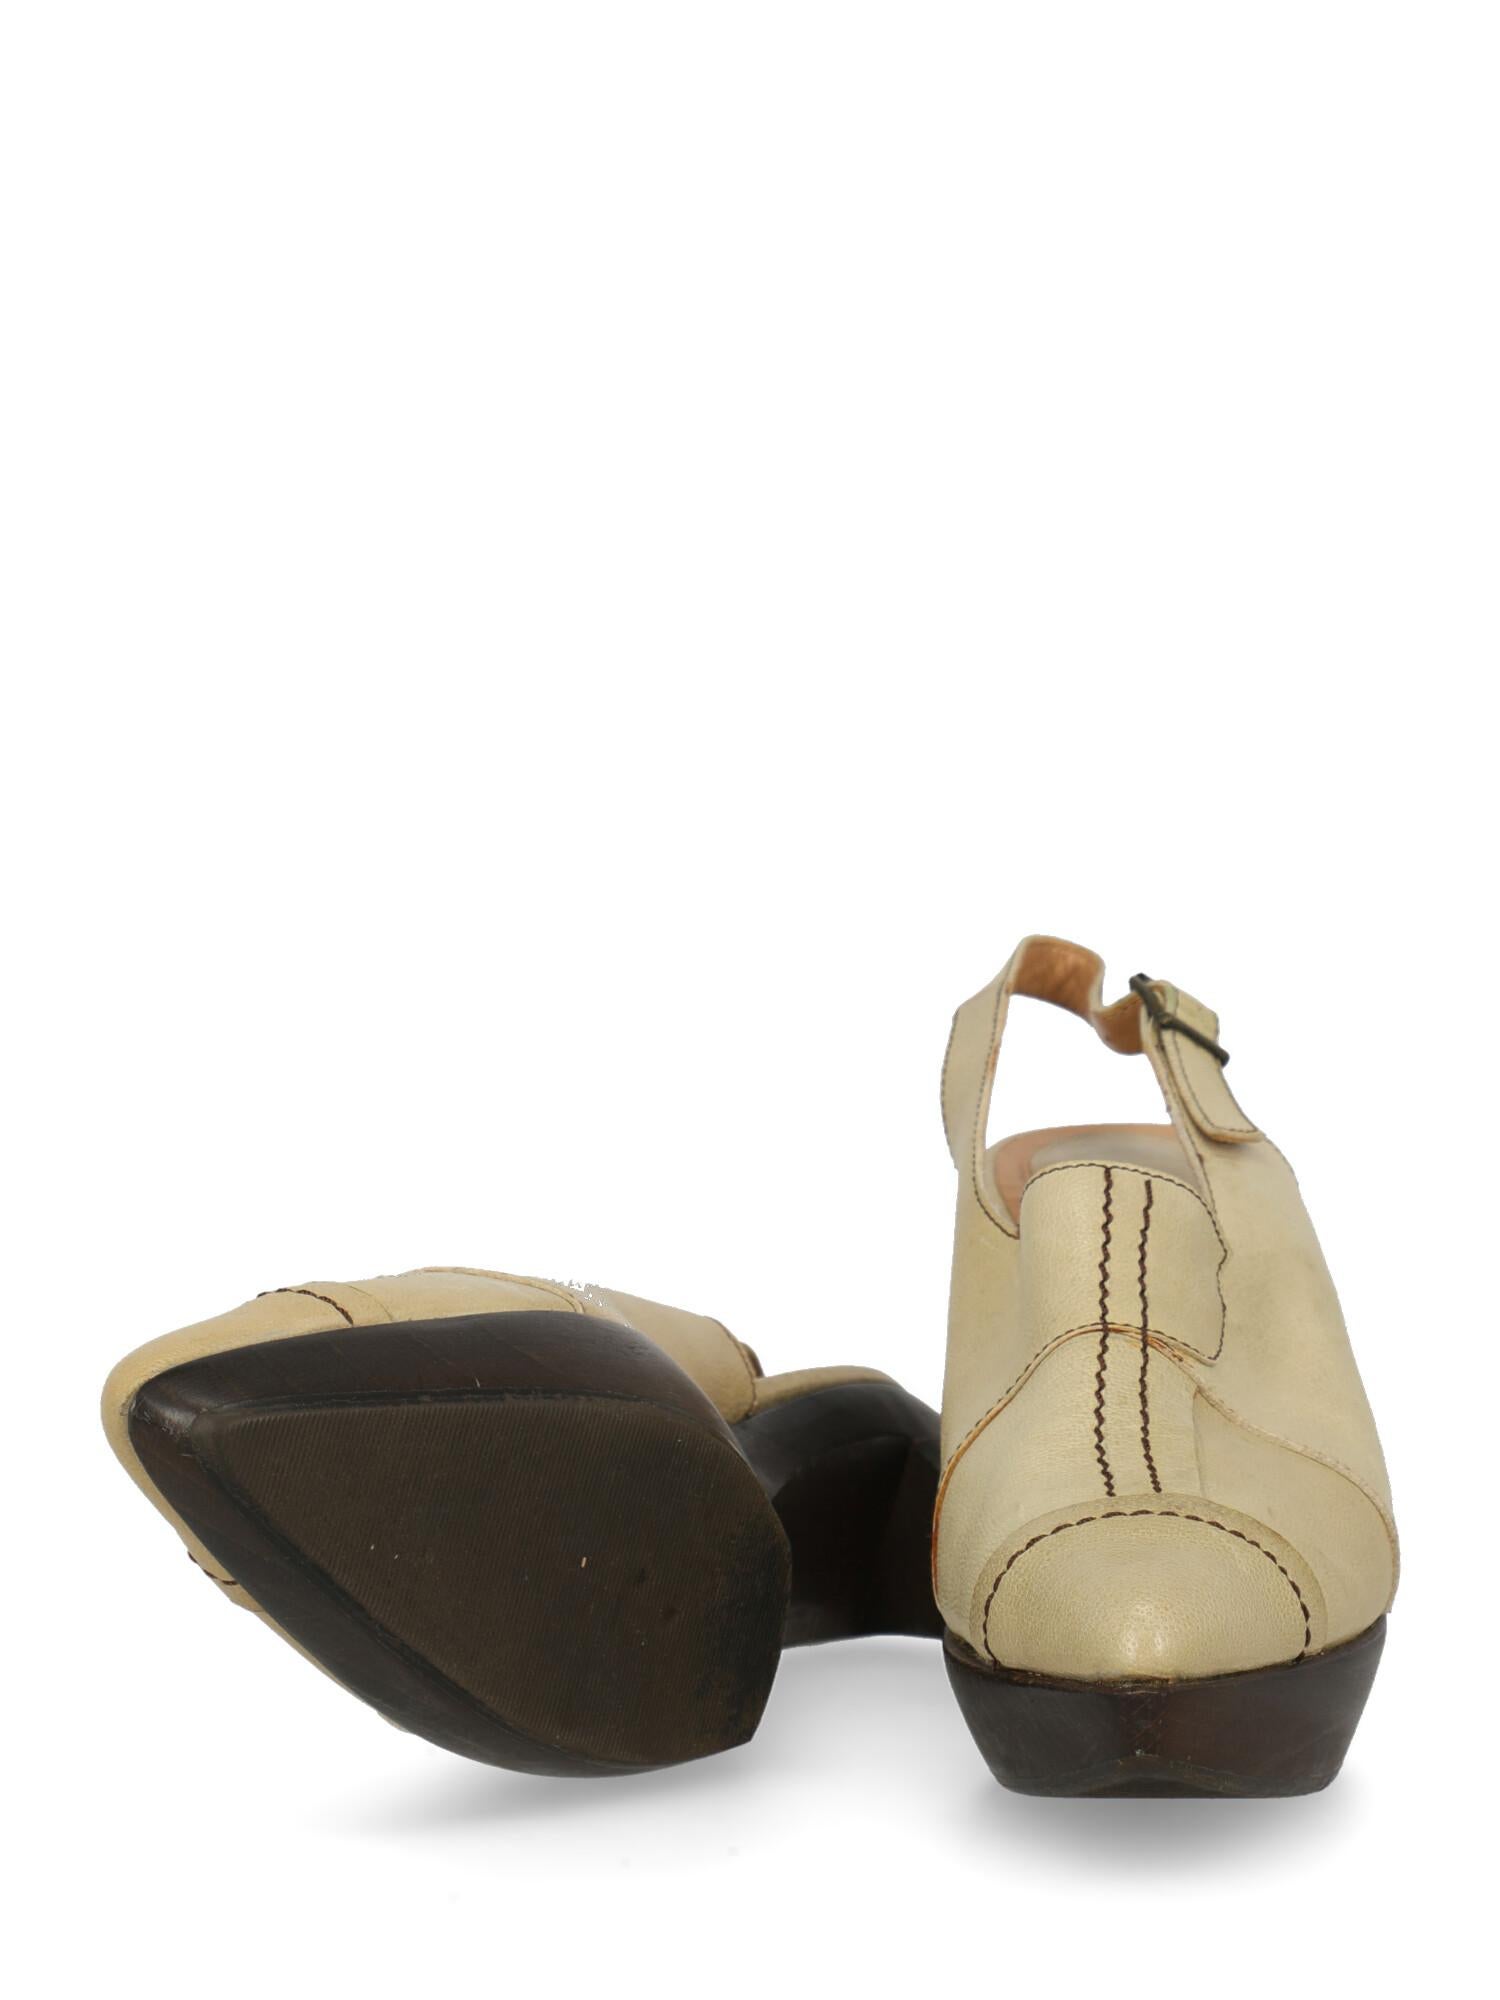 Marni Woman Mules Beige Leather IT 40 For Sale 1